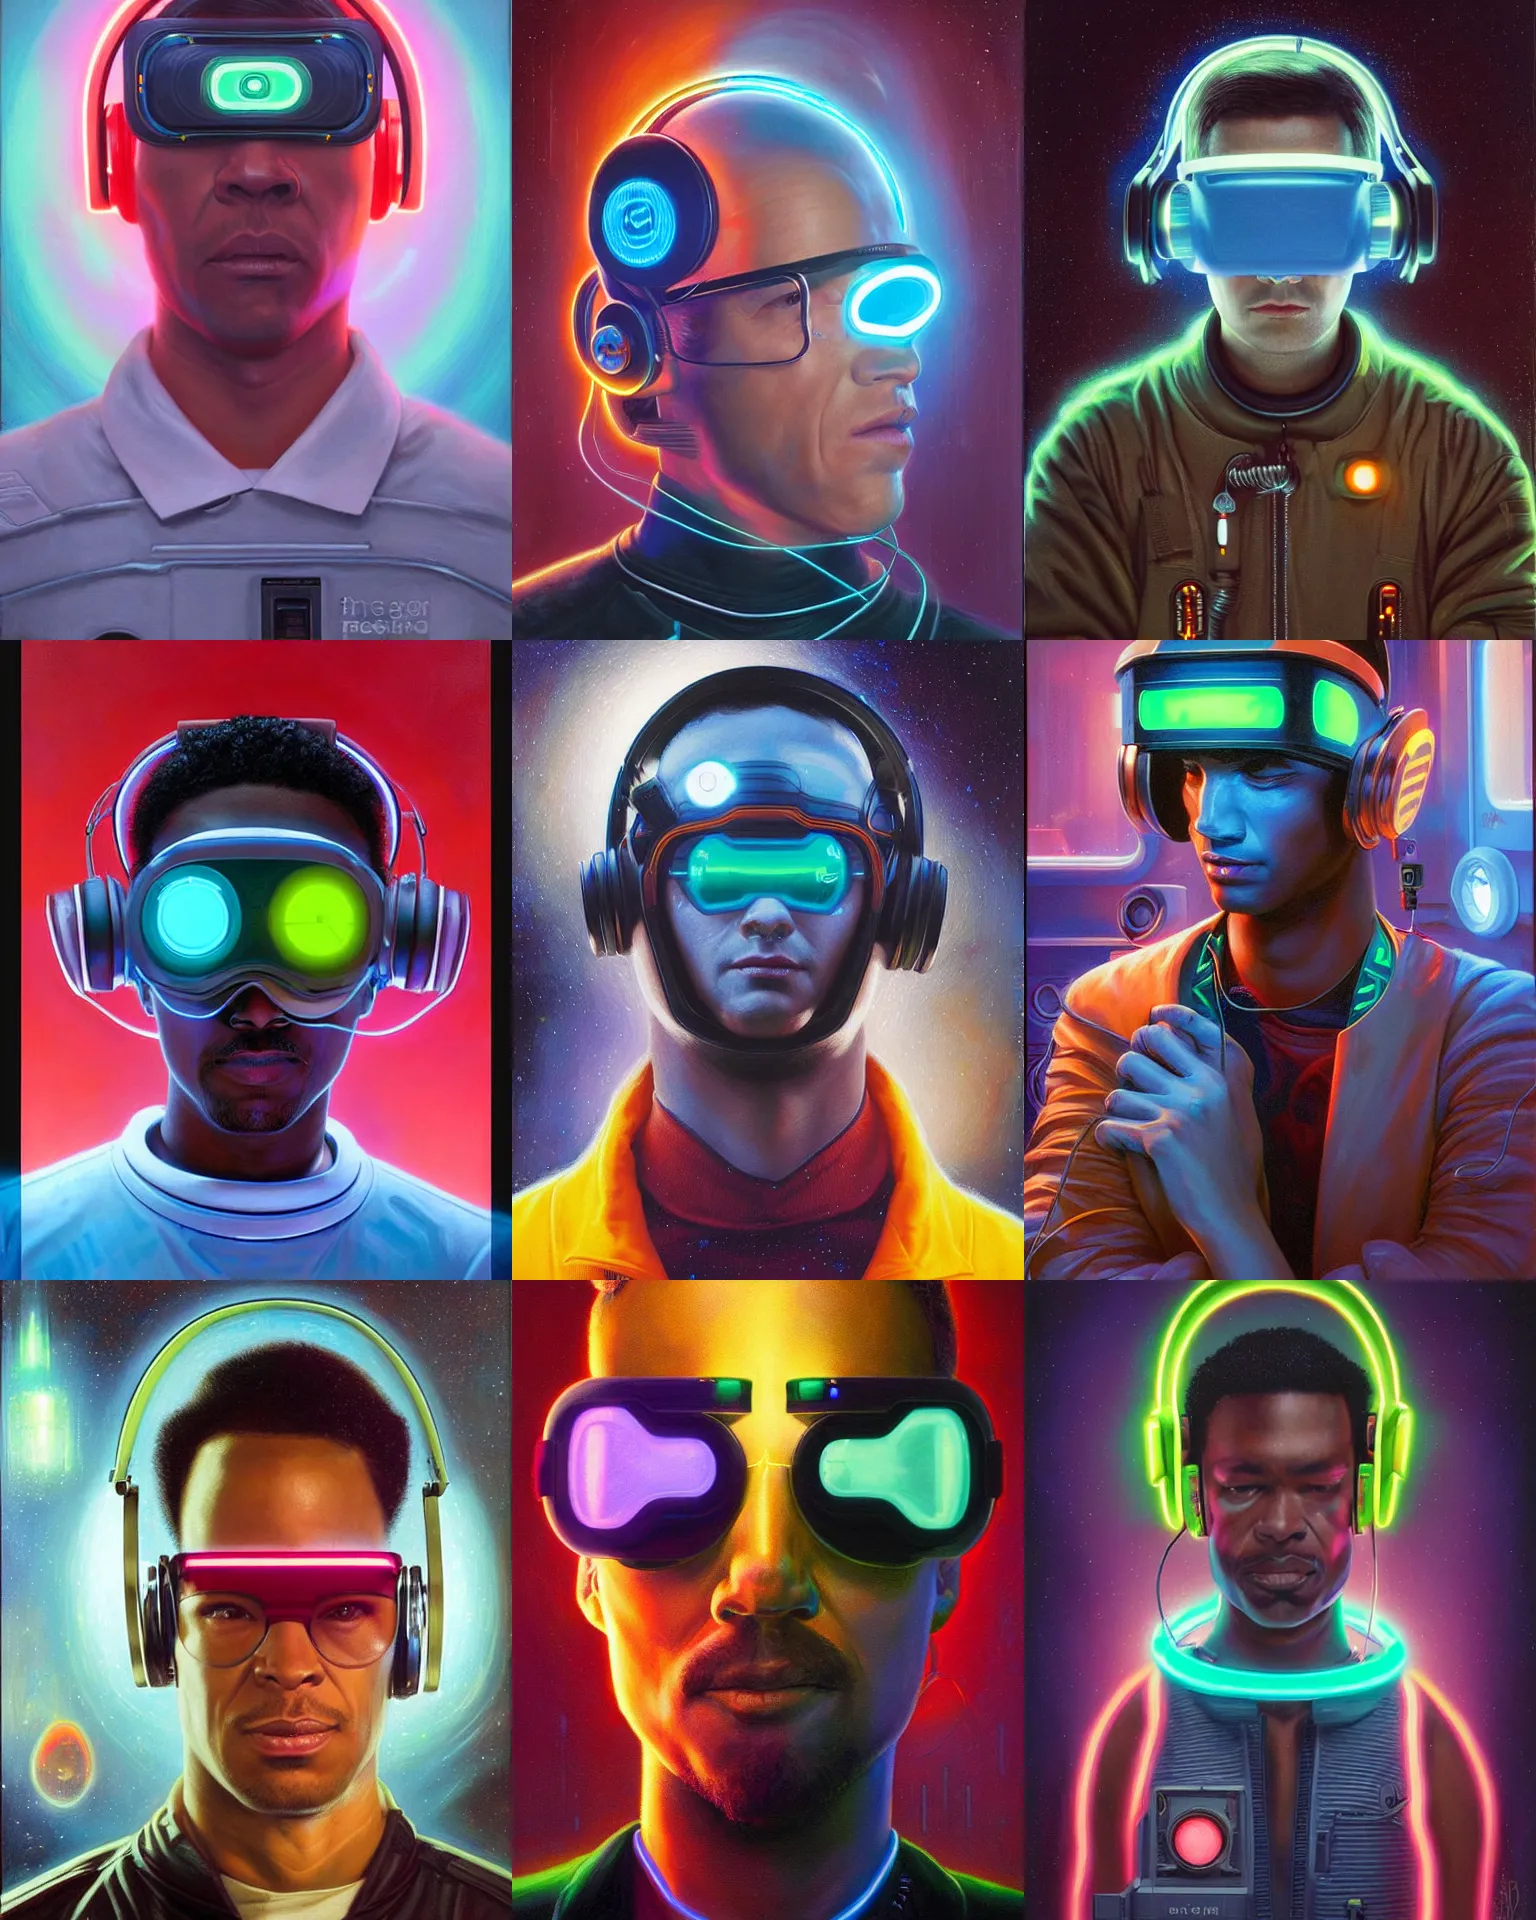 Prompt: neon cyberpunk engineer with glowing geordi cyclops visor over eyes and sleek headphones headshot desaturated portrait painting by donato giancola, dean cornwall, rhads, tom whalen, alex grey astronaut fashion photography